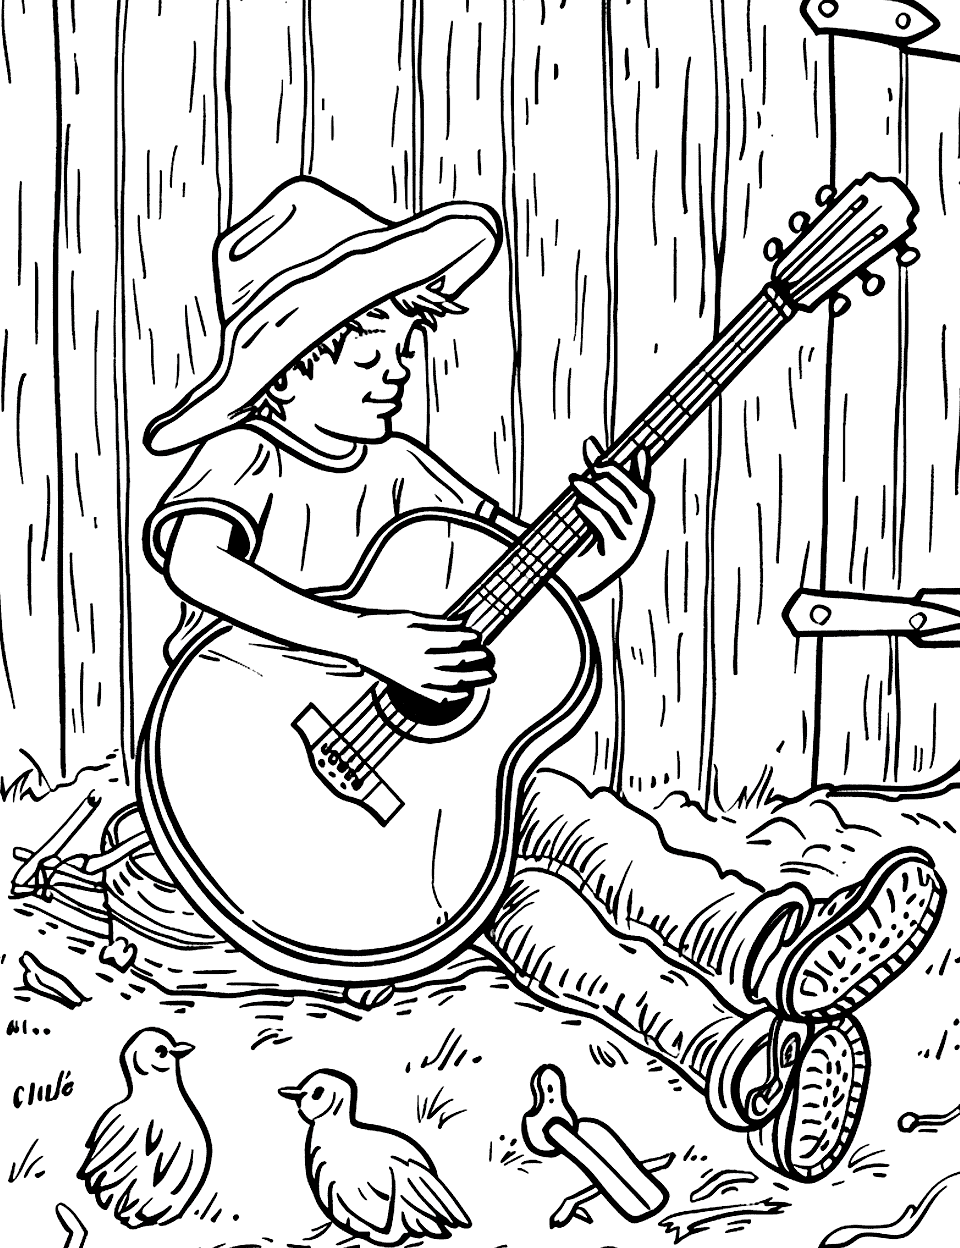 Country Guitar at the Farm Music Coloring Page - A teenager strumming a guitar with animals in a barn.